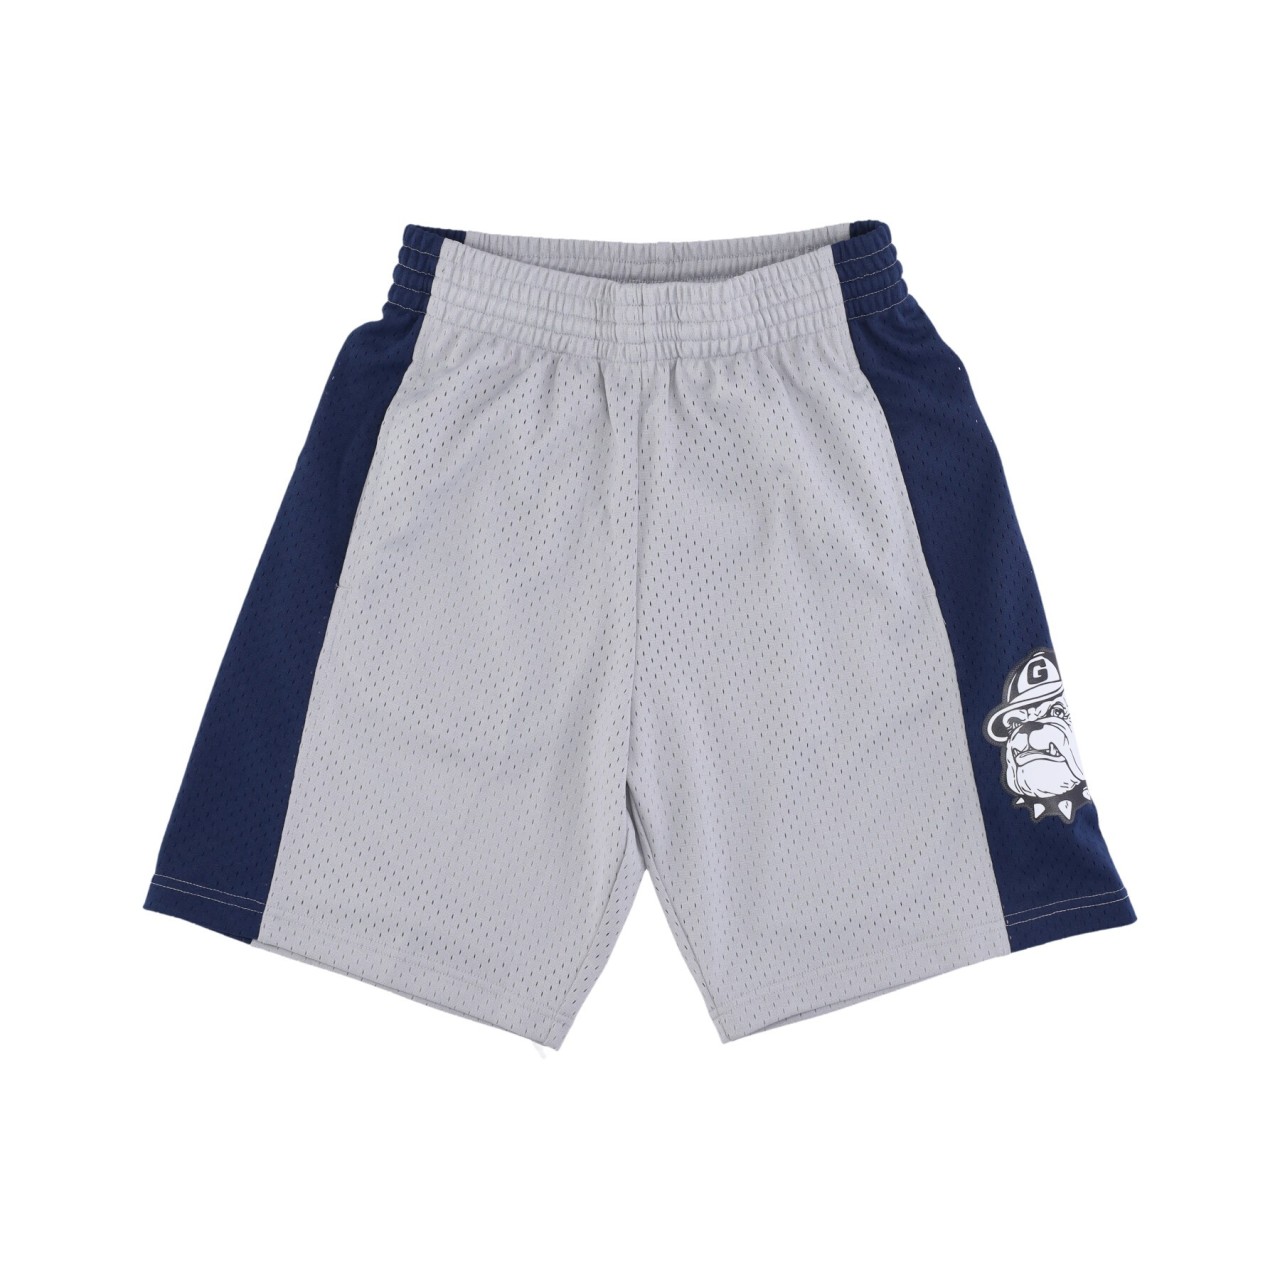 MITCHELL & NESS NCAA SWINGMAN LIGHT SHORTS GEOHOY SMSH5364-GTW90PPPCHRM